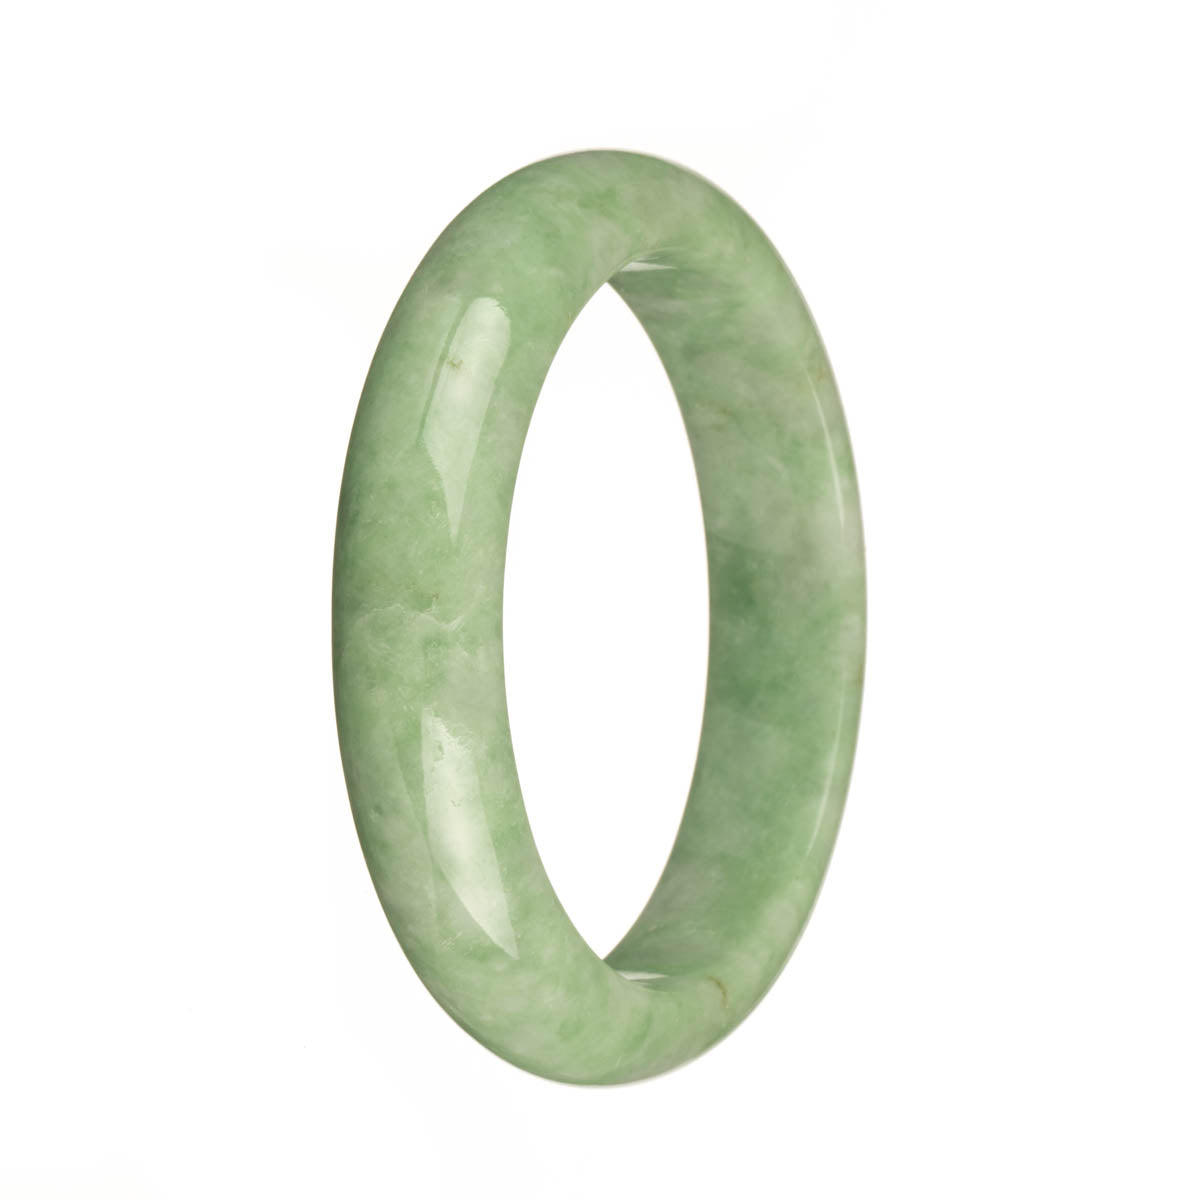 A close-up photo of a half-moon-shaped apple green jade bracelet with a smooth, polished surface. The jade stone has a vibrant green color, and the bracelet is expertly crafted, highlighting the natural beauty of the stone.